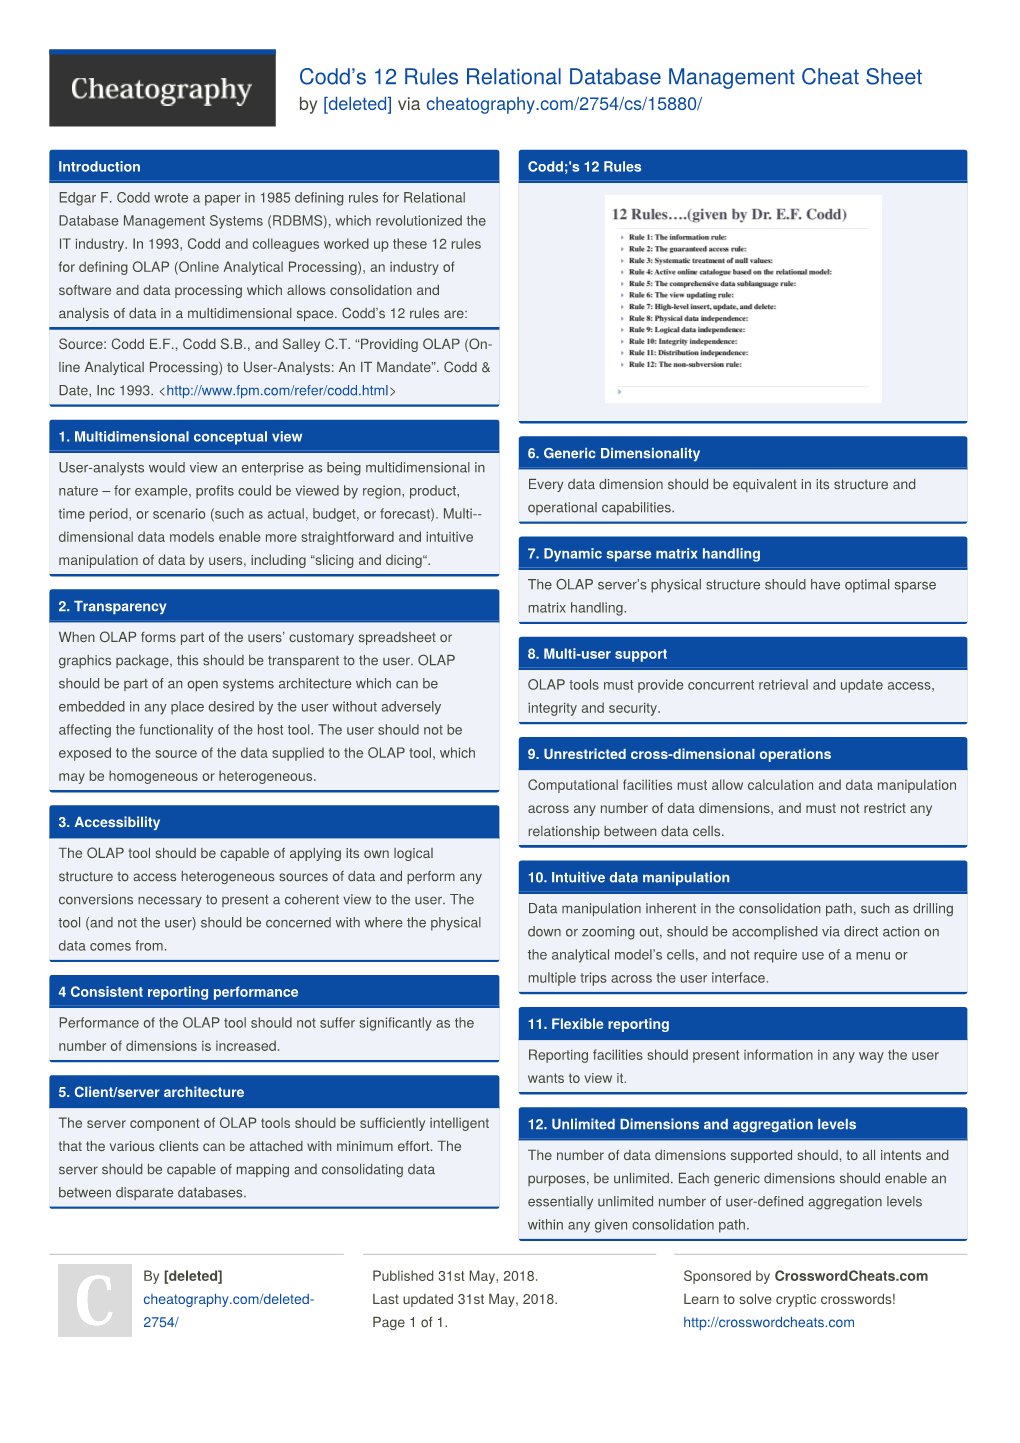 Codd's 12 Rules Relational Database Management Cheat Sheet by [Deleted]